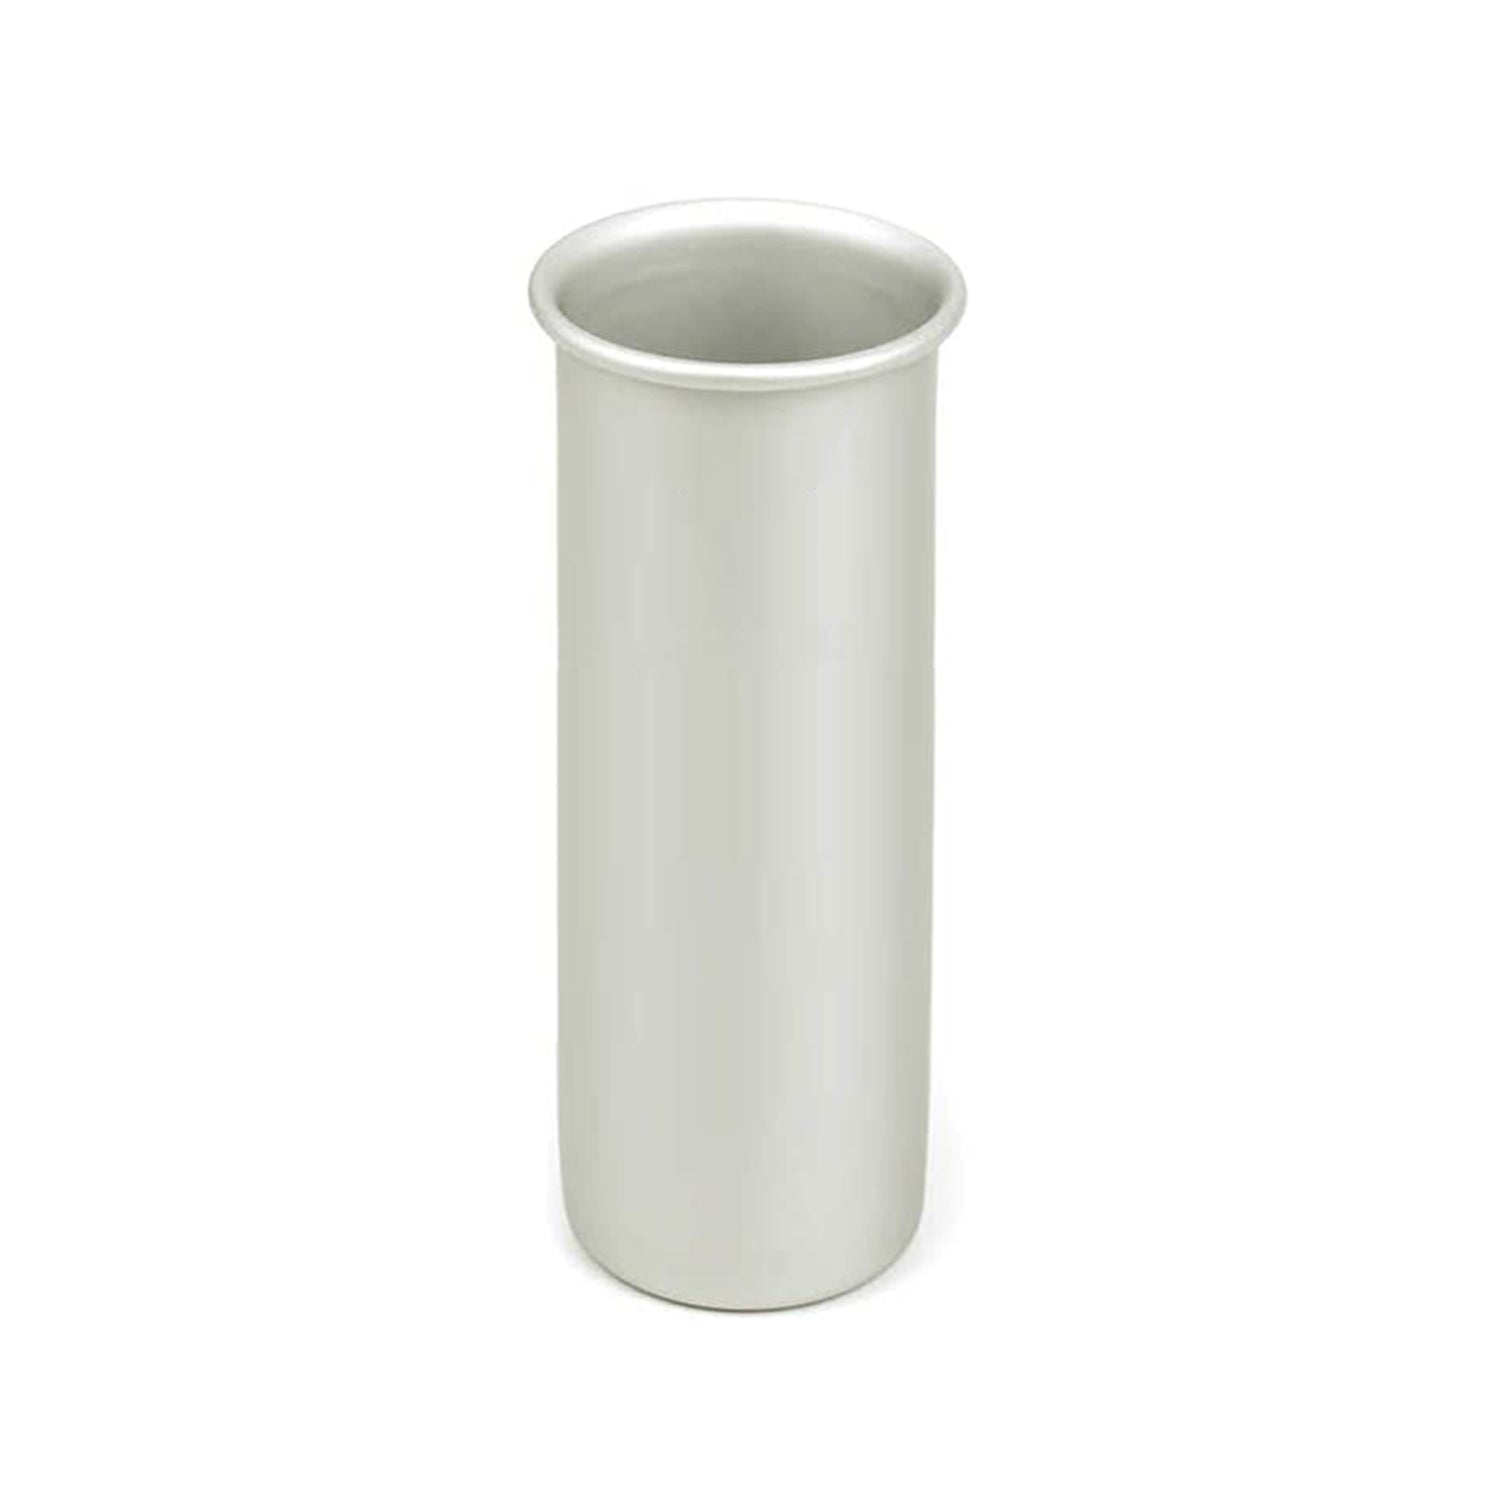 Cylinder Candle Mold (4